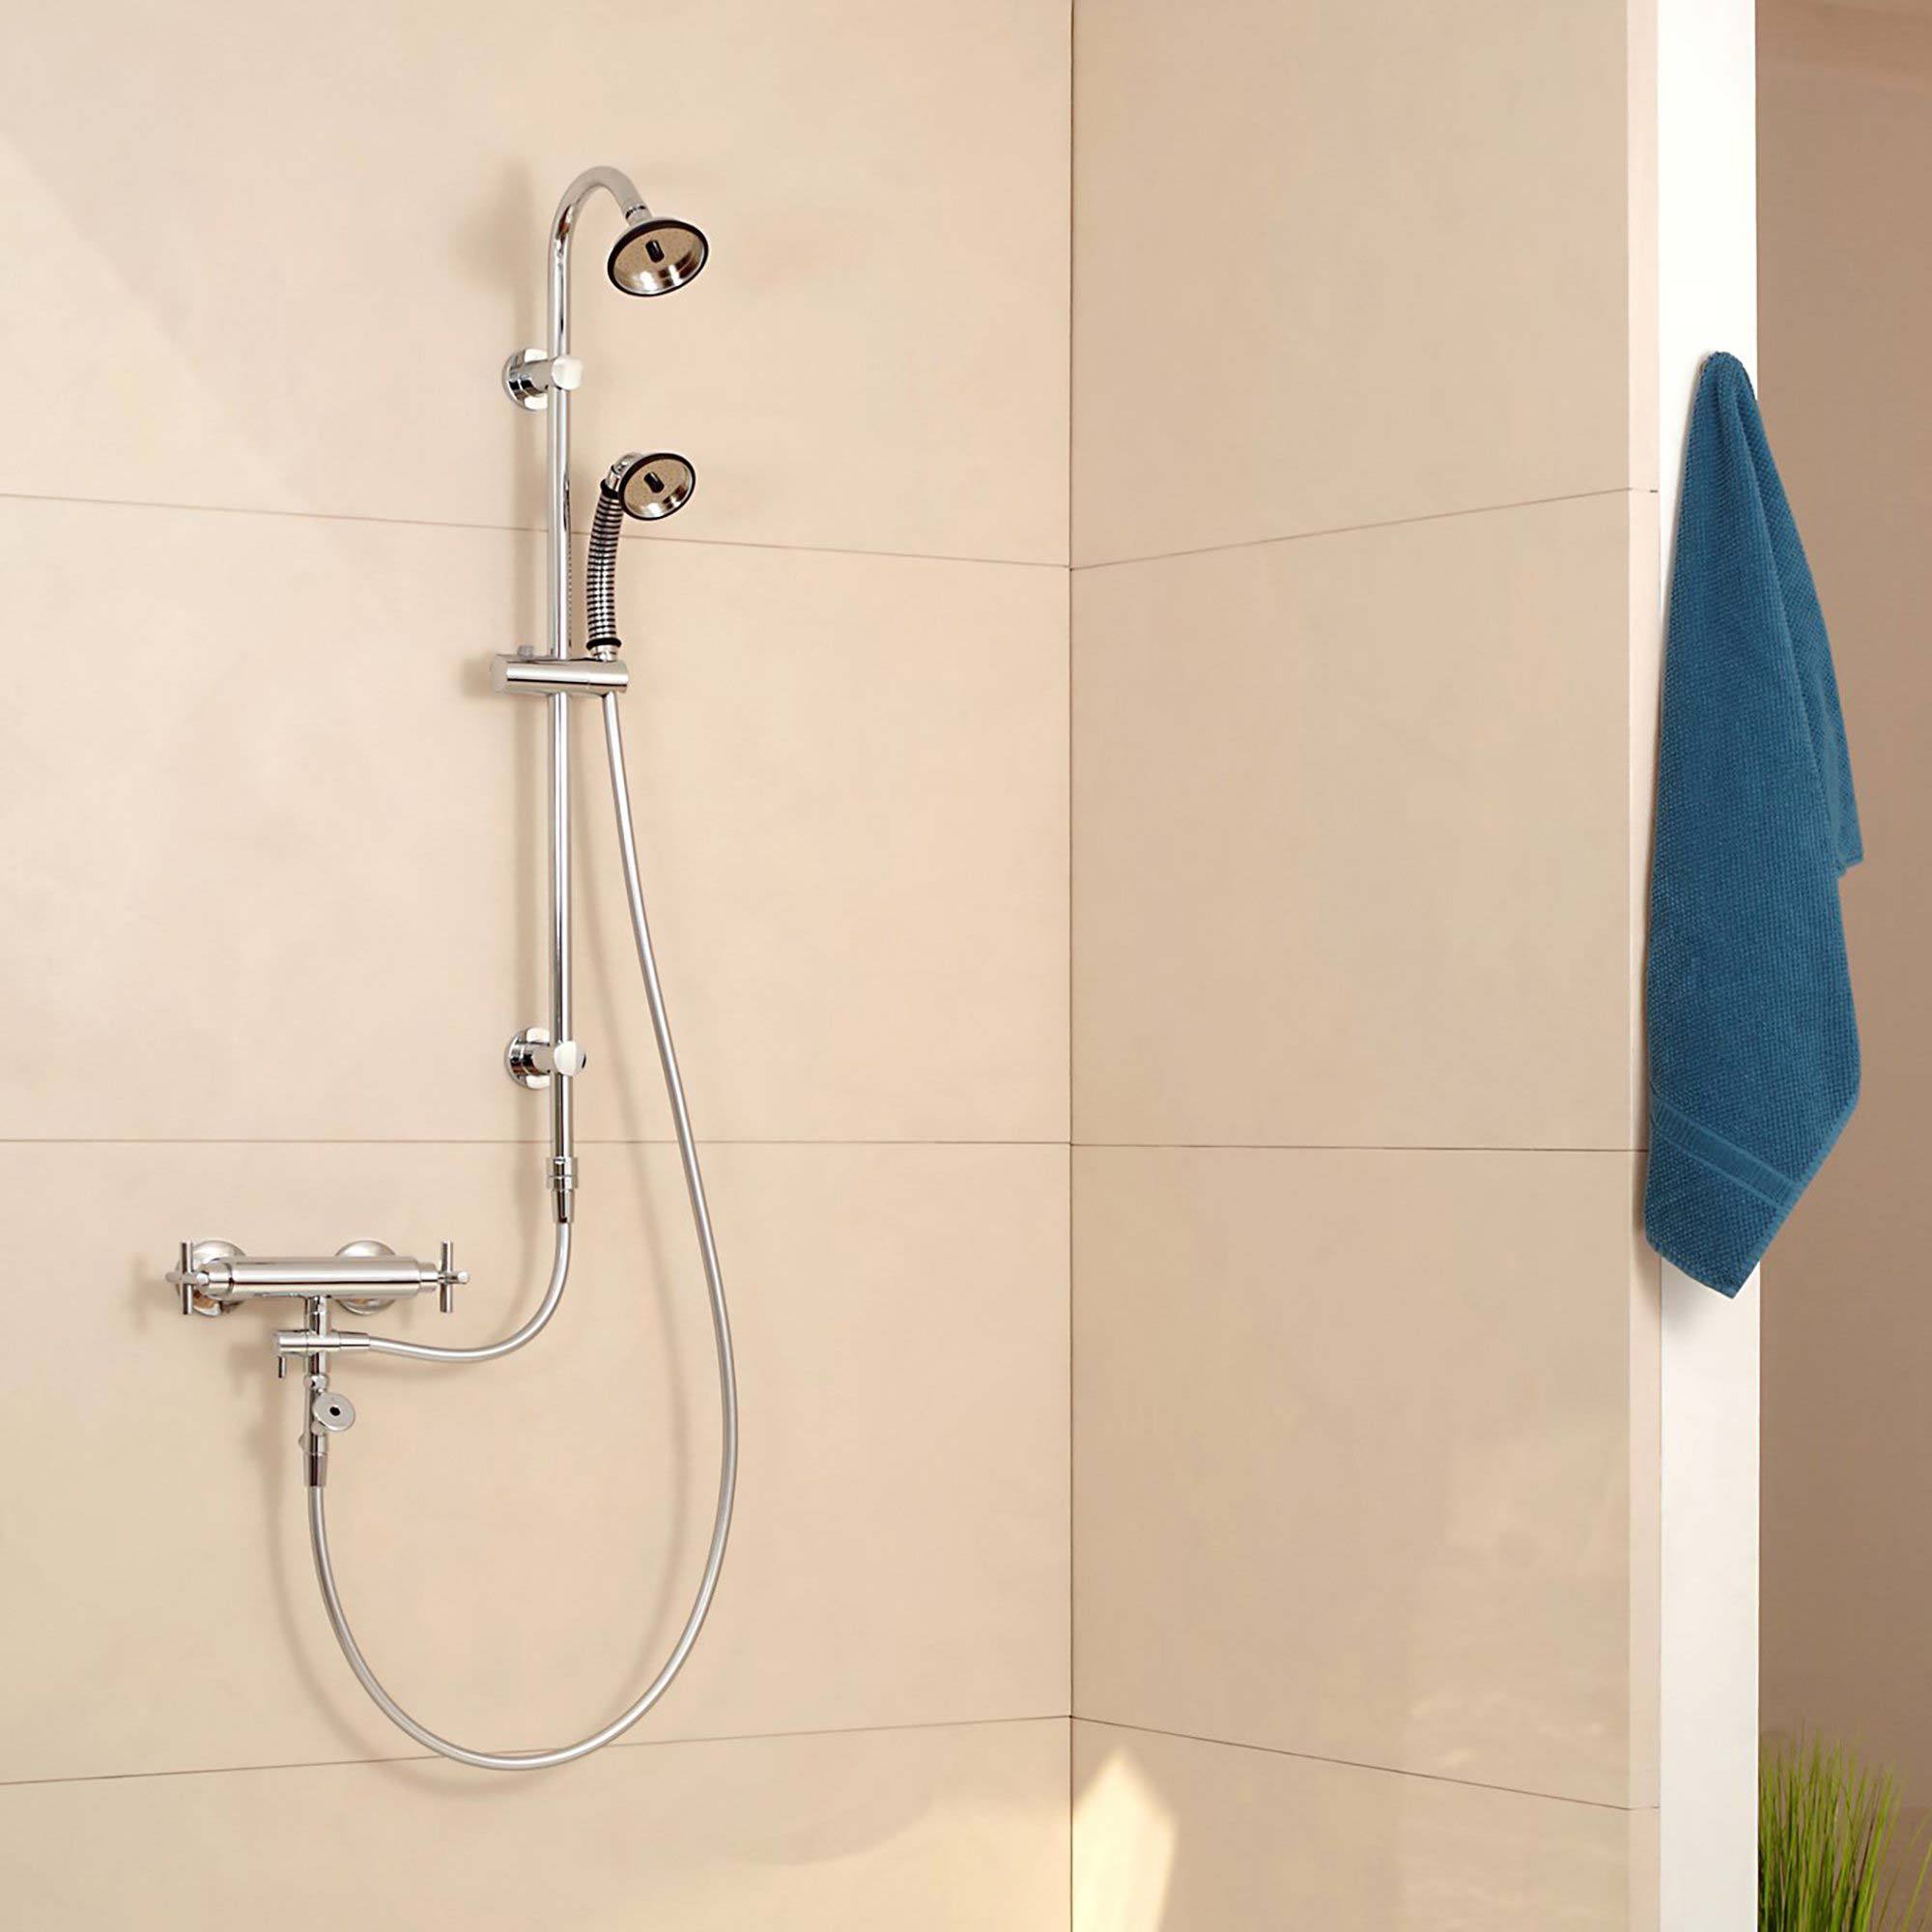 BUBBLE-RAIN® XL Shower Head & Handle Displayed in Bathroom with sold separately flex hose